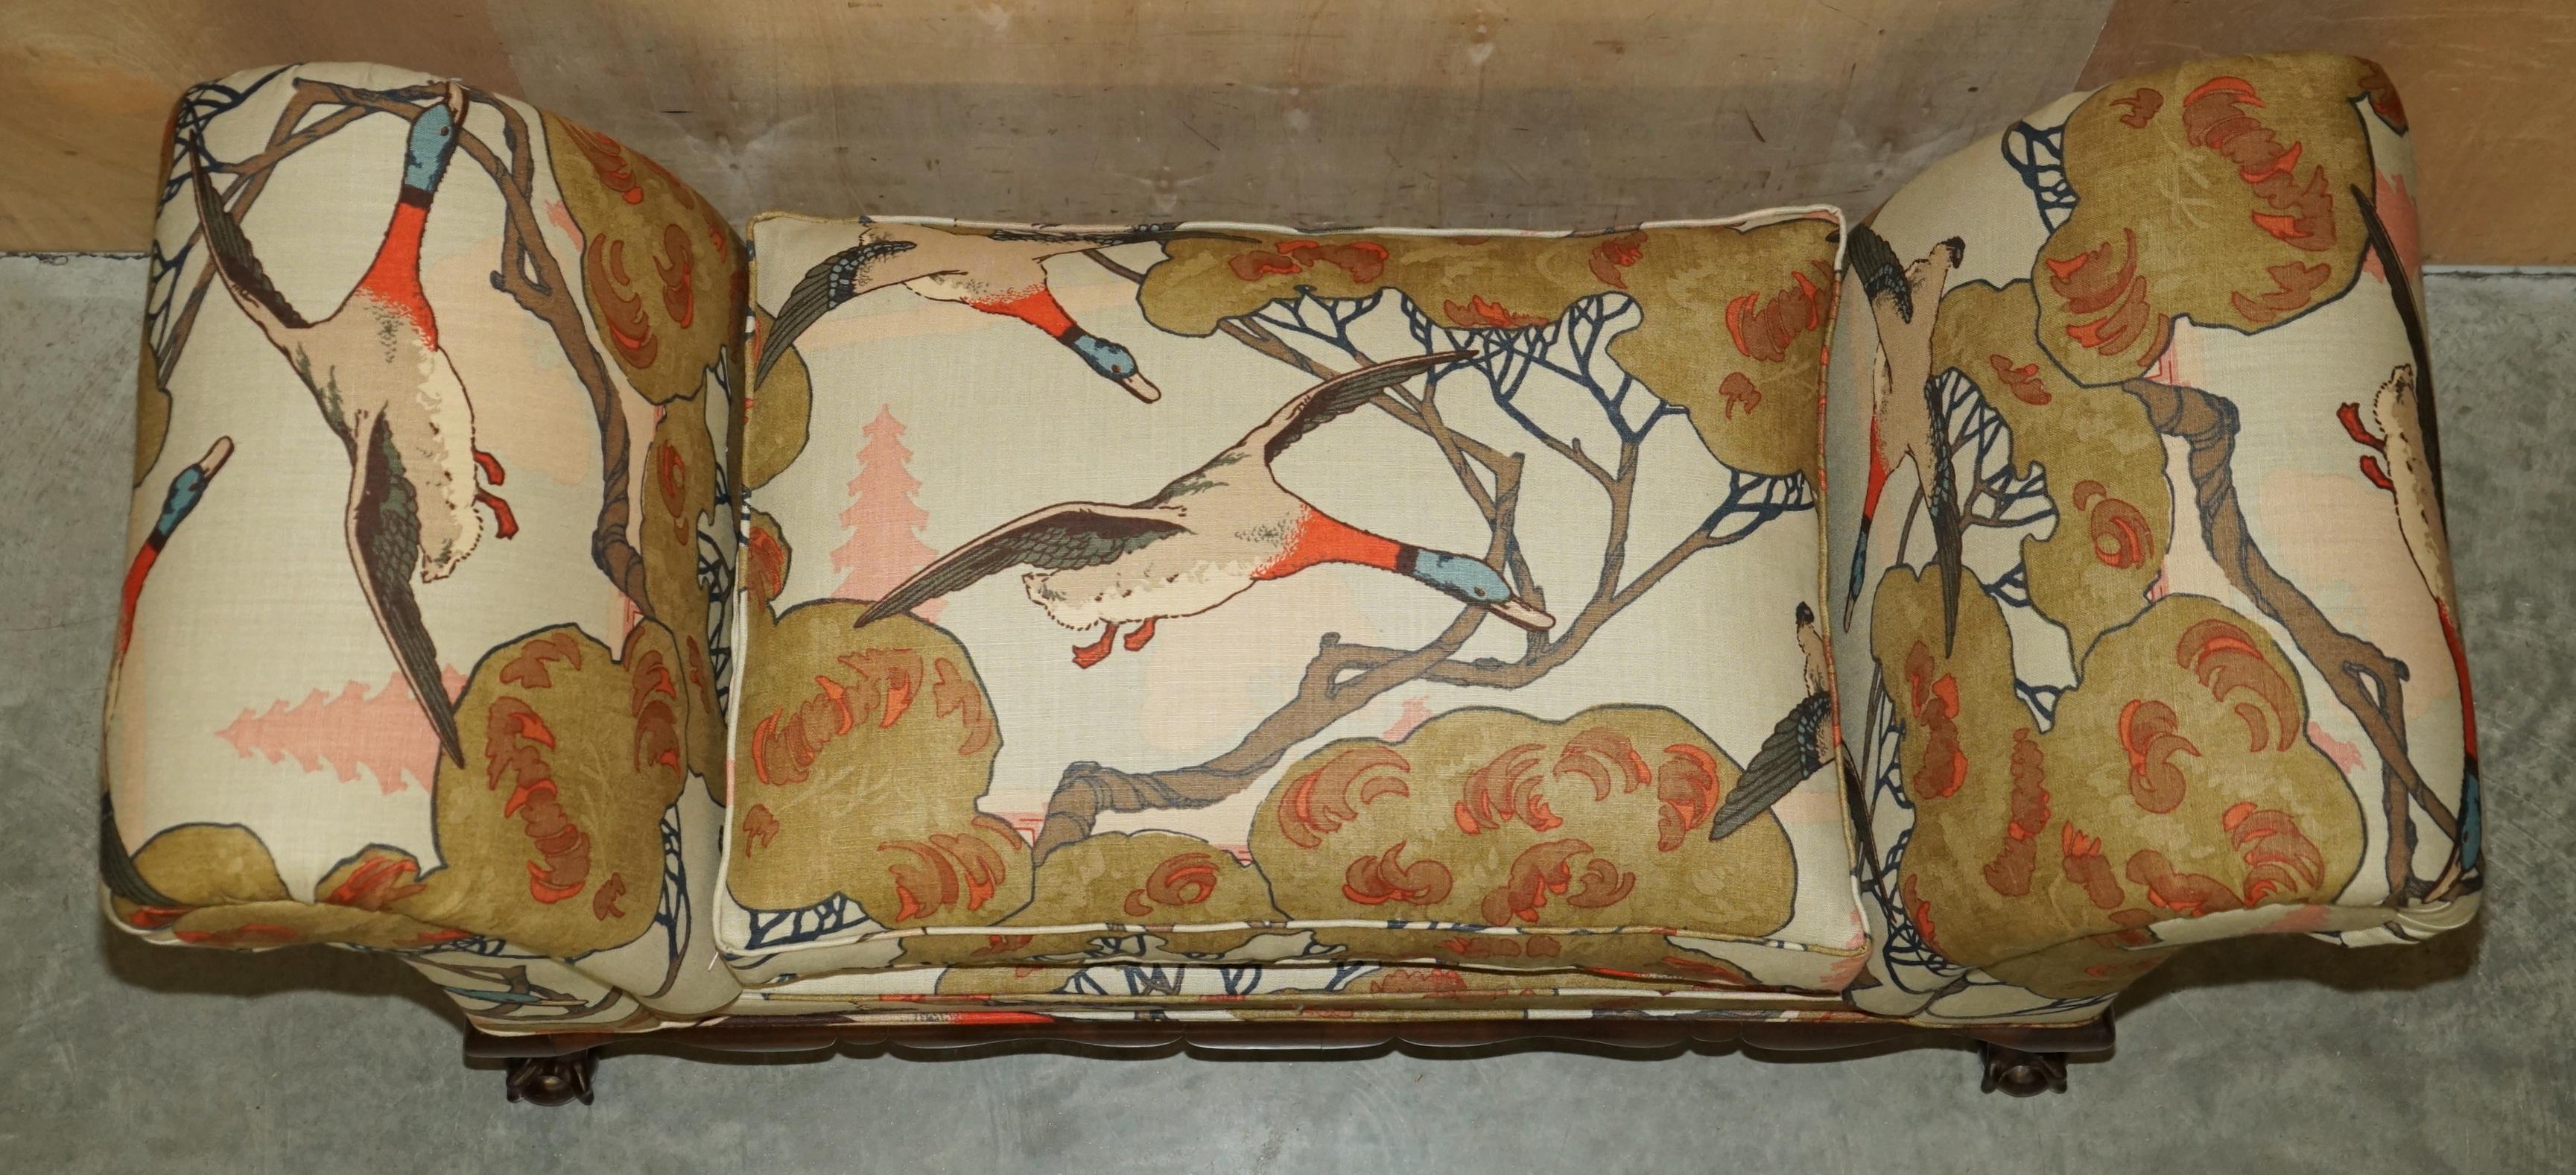 ANTIQUE CLAW & BALL FOOT HALL BENCH WiNDOW SEAT IN MULBERRY FLYING DUCK S FABRIC im Angebot 7